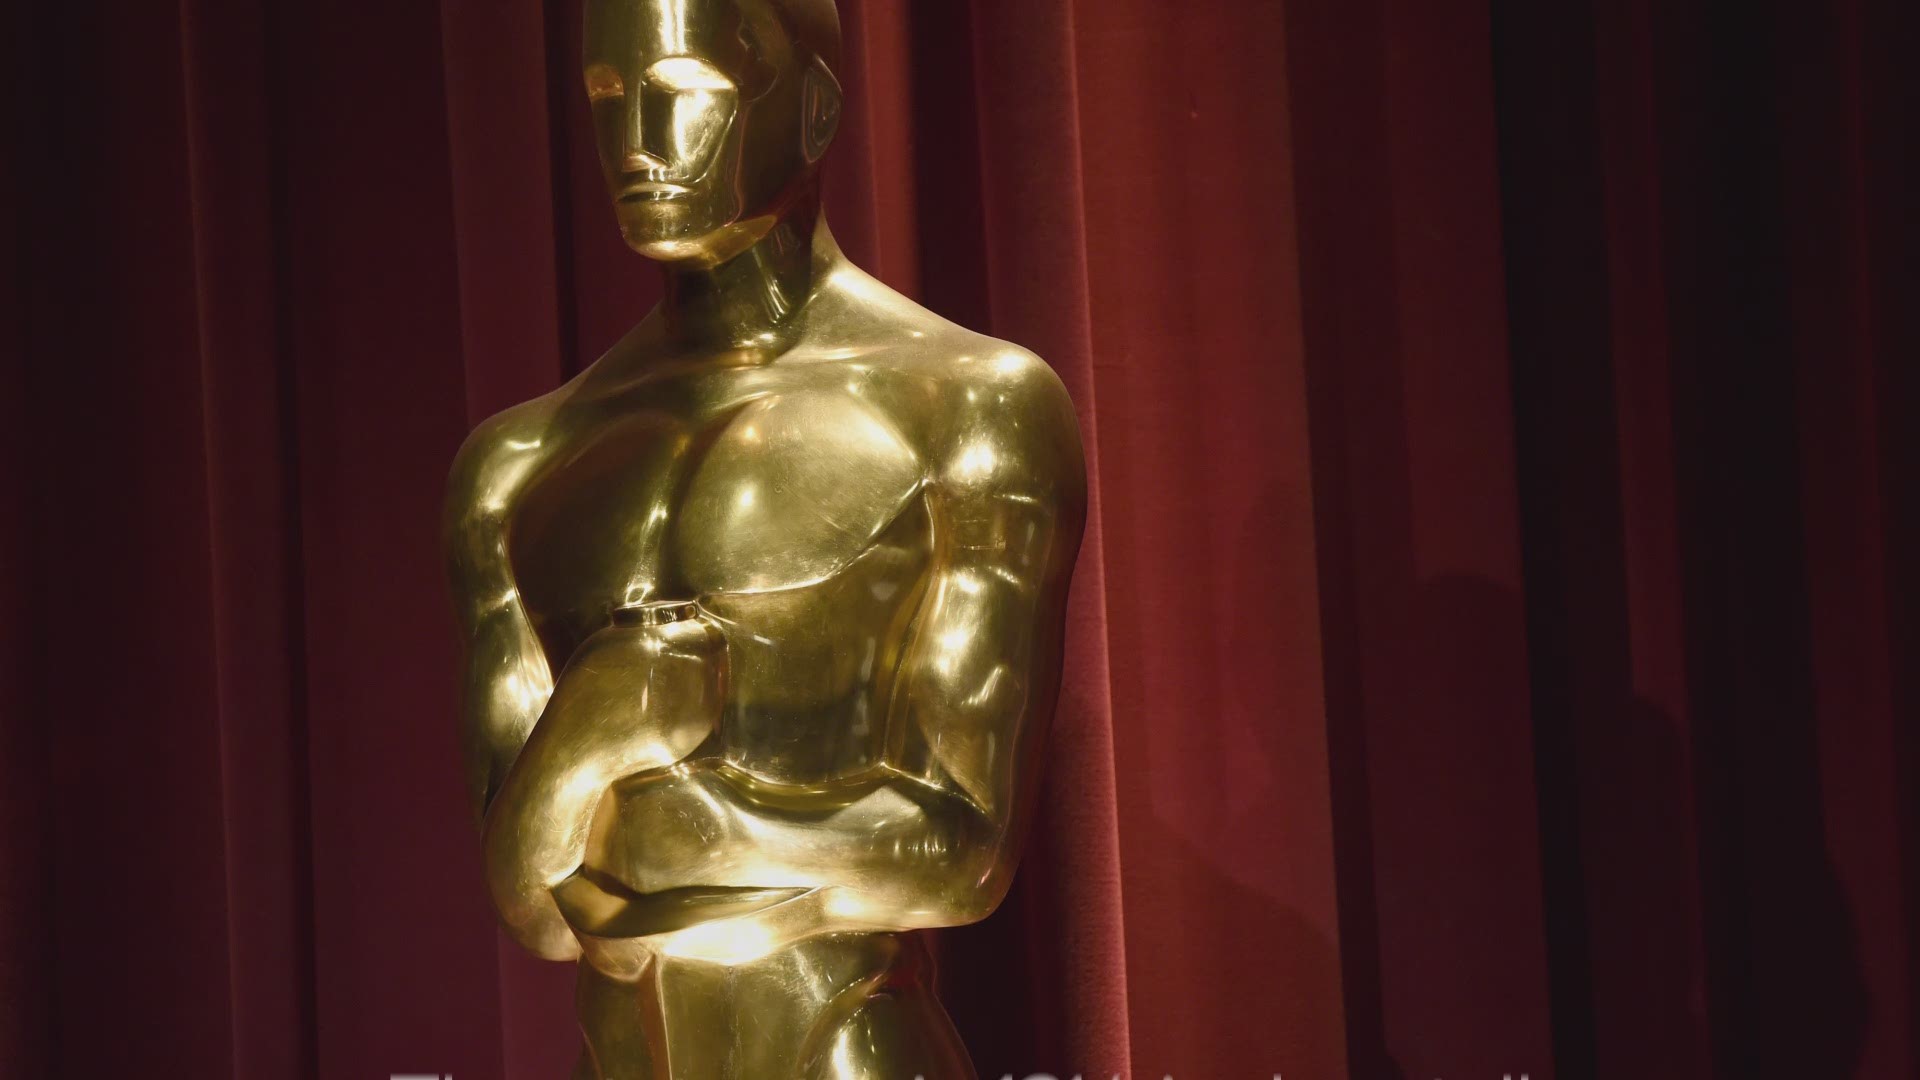 The Oscar is one of Hollywood's most prized awards, but did you know its nickname originated with a person's uncle? Here are 10 fun facts about the Academy Awards statue.